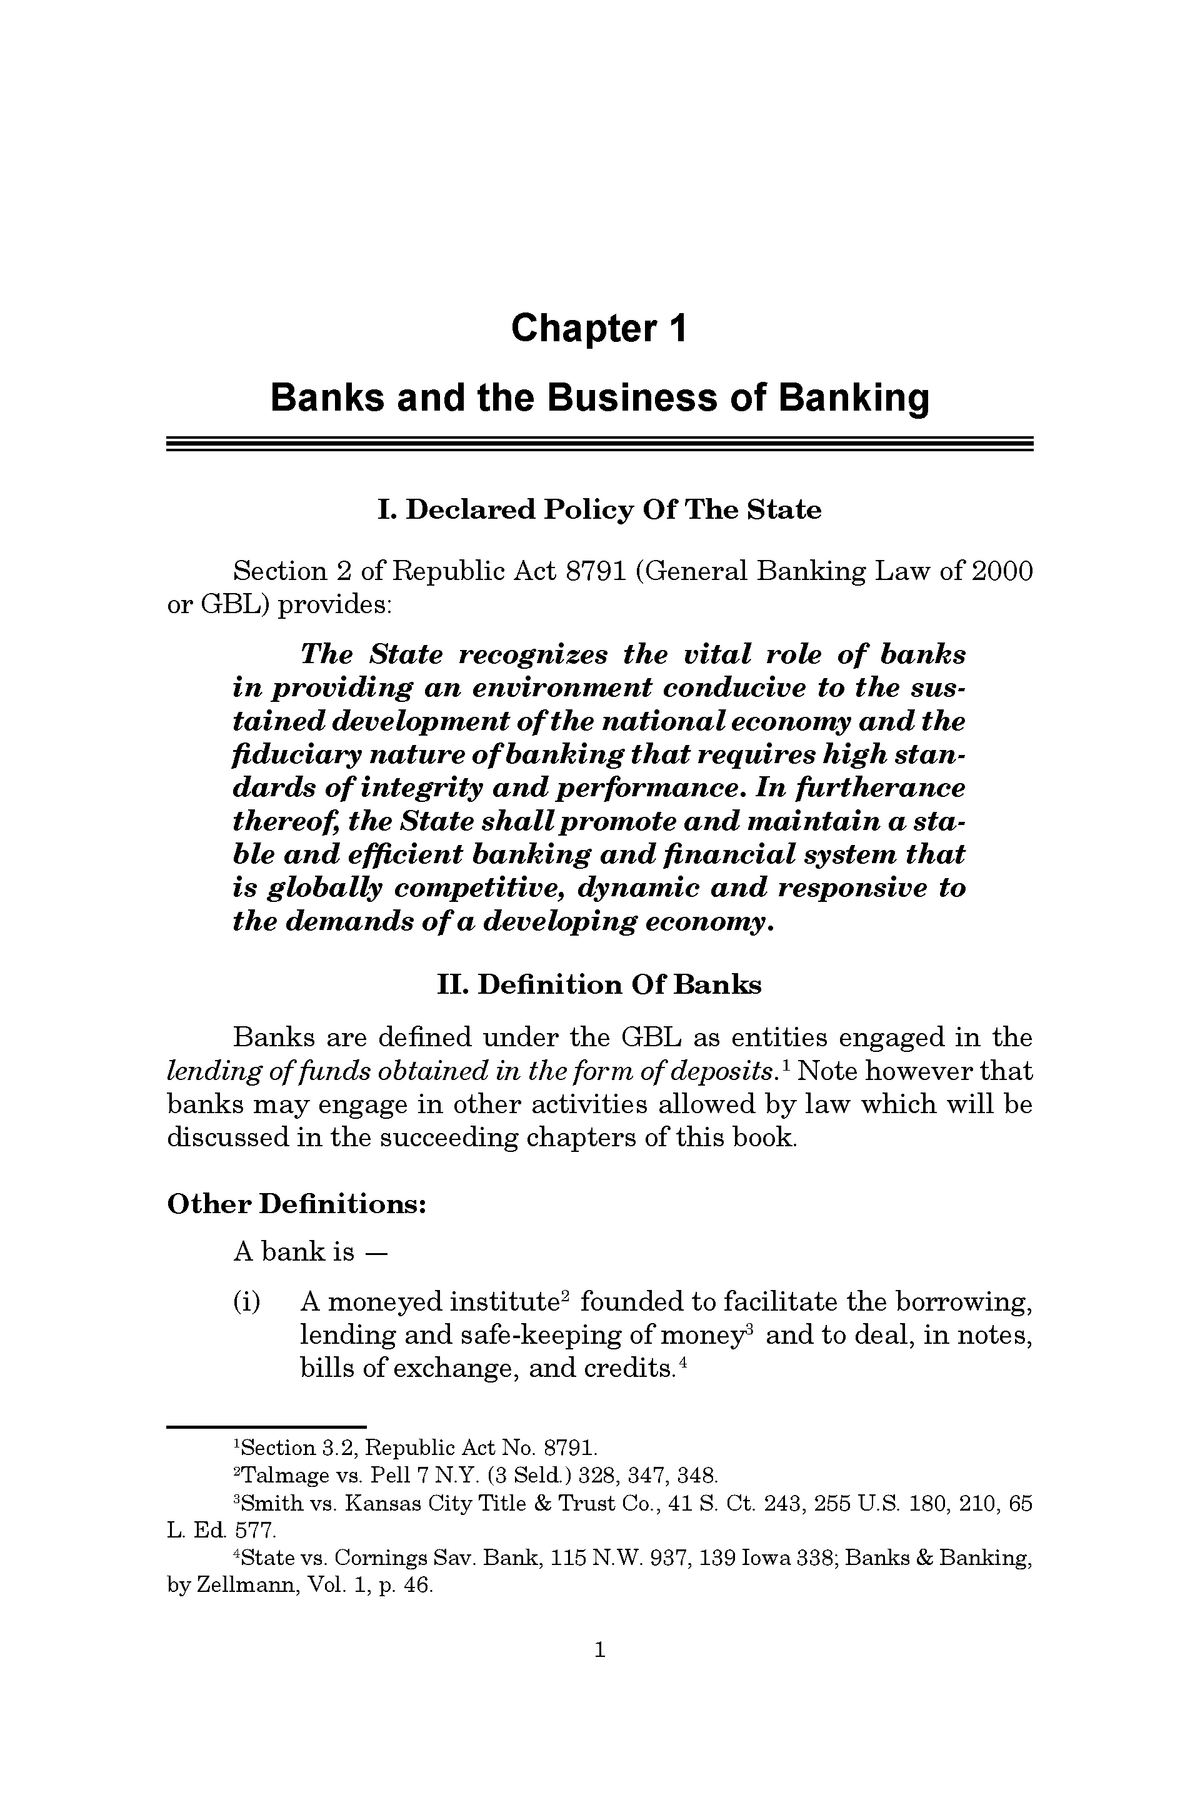 Dizon - Banking Laws - 1 1 Chapter 1 Banks and the Business of Banking ...